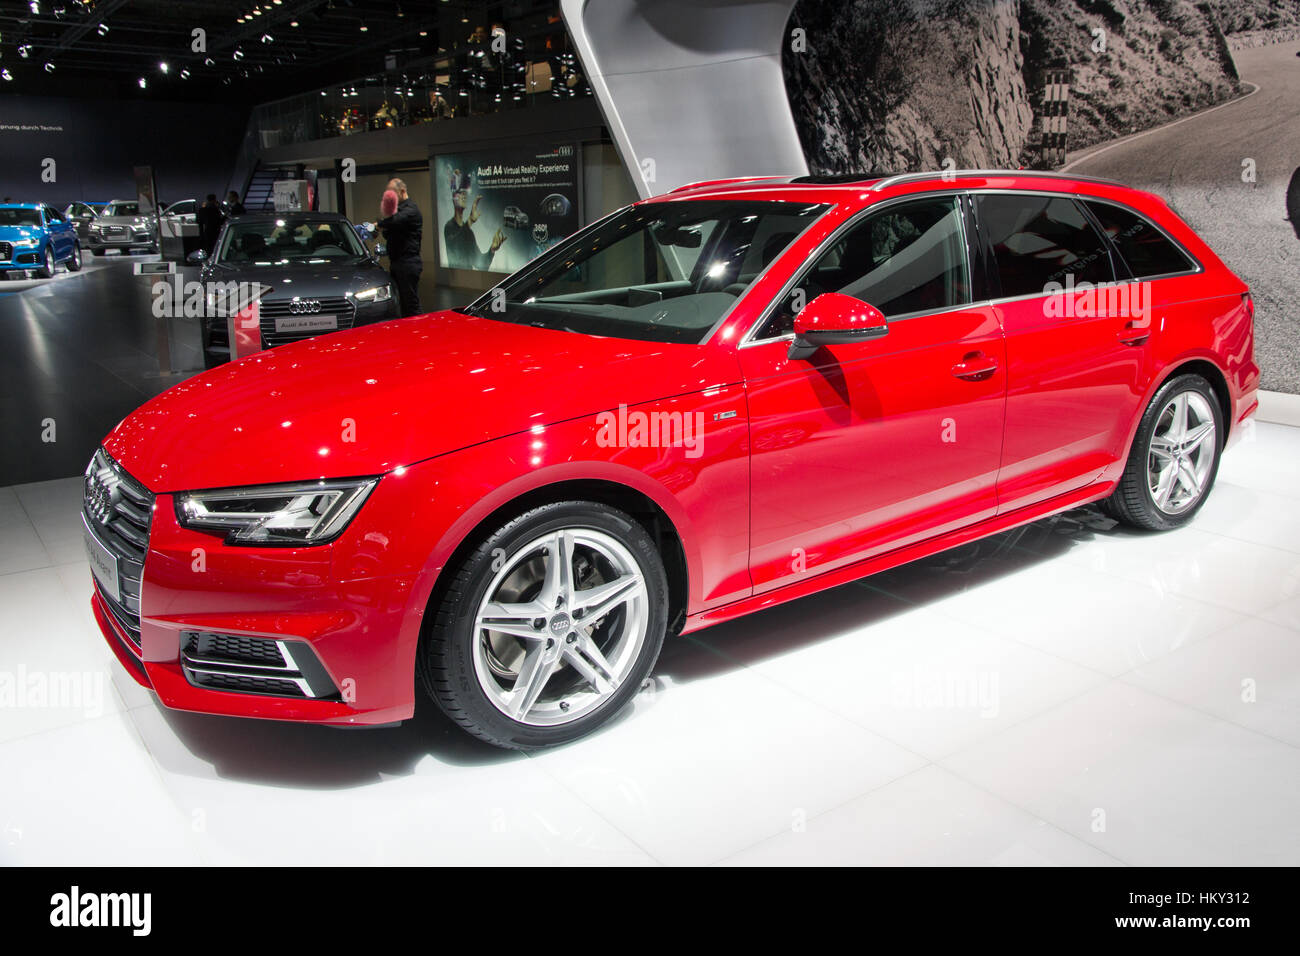 BRUSSELS - JAN 12, 2016: Audi A4 Avant on display at the Brussels Motor Show. Stock Photo